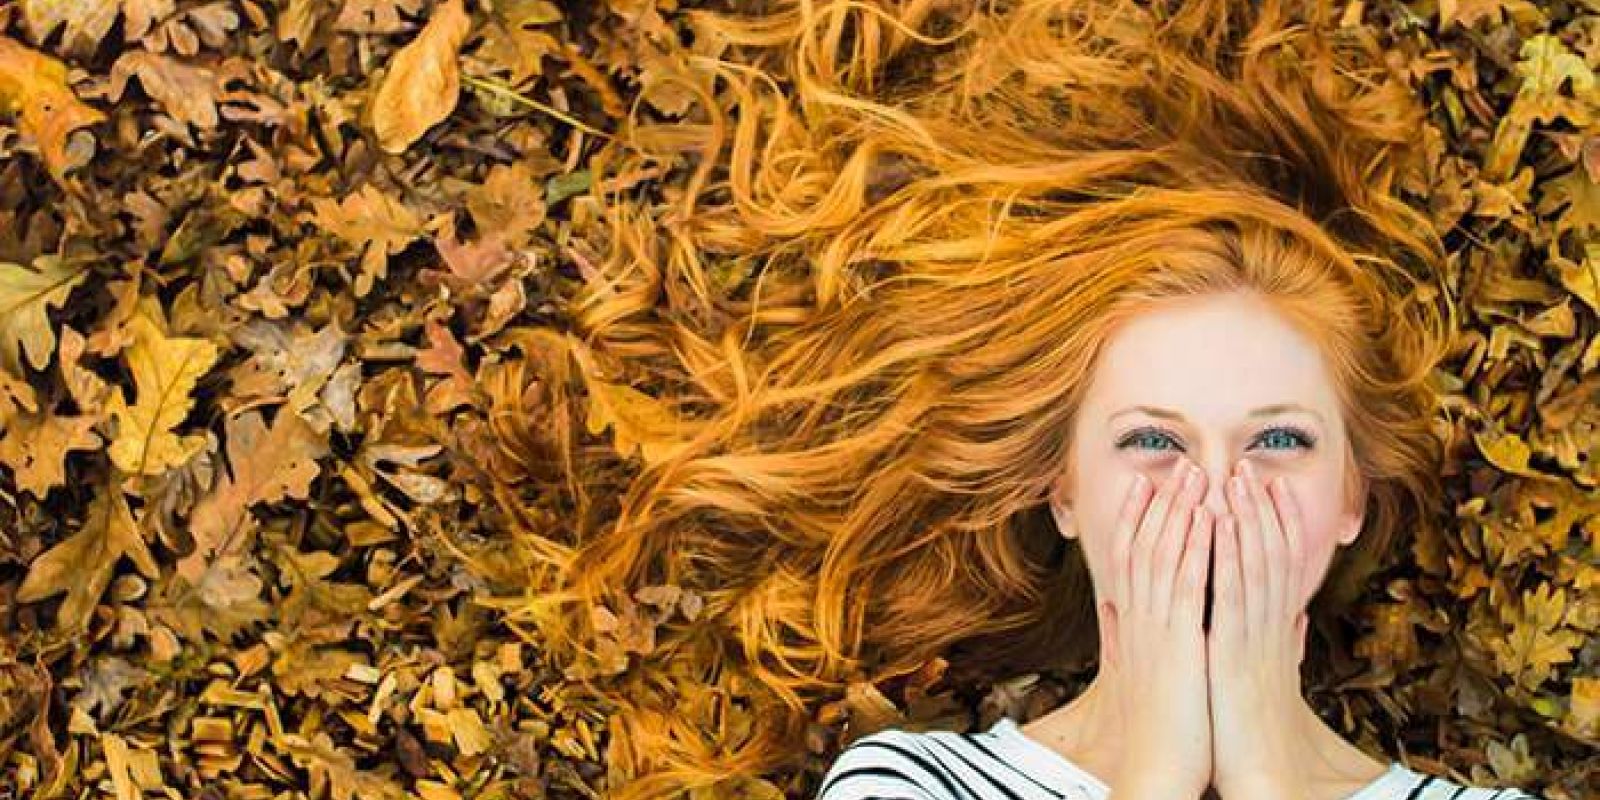 The Autumn Hair Care Guide admin ajax.php?action=kernel&p=image&src=%7B%22file%22%3A%22wp content%2Fuploads%2F2019%2F10%2FAutumn Hair Loss